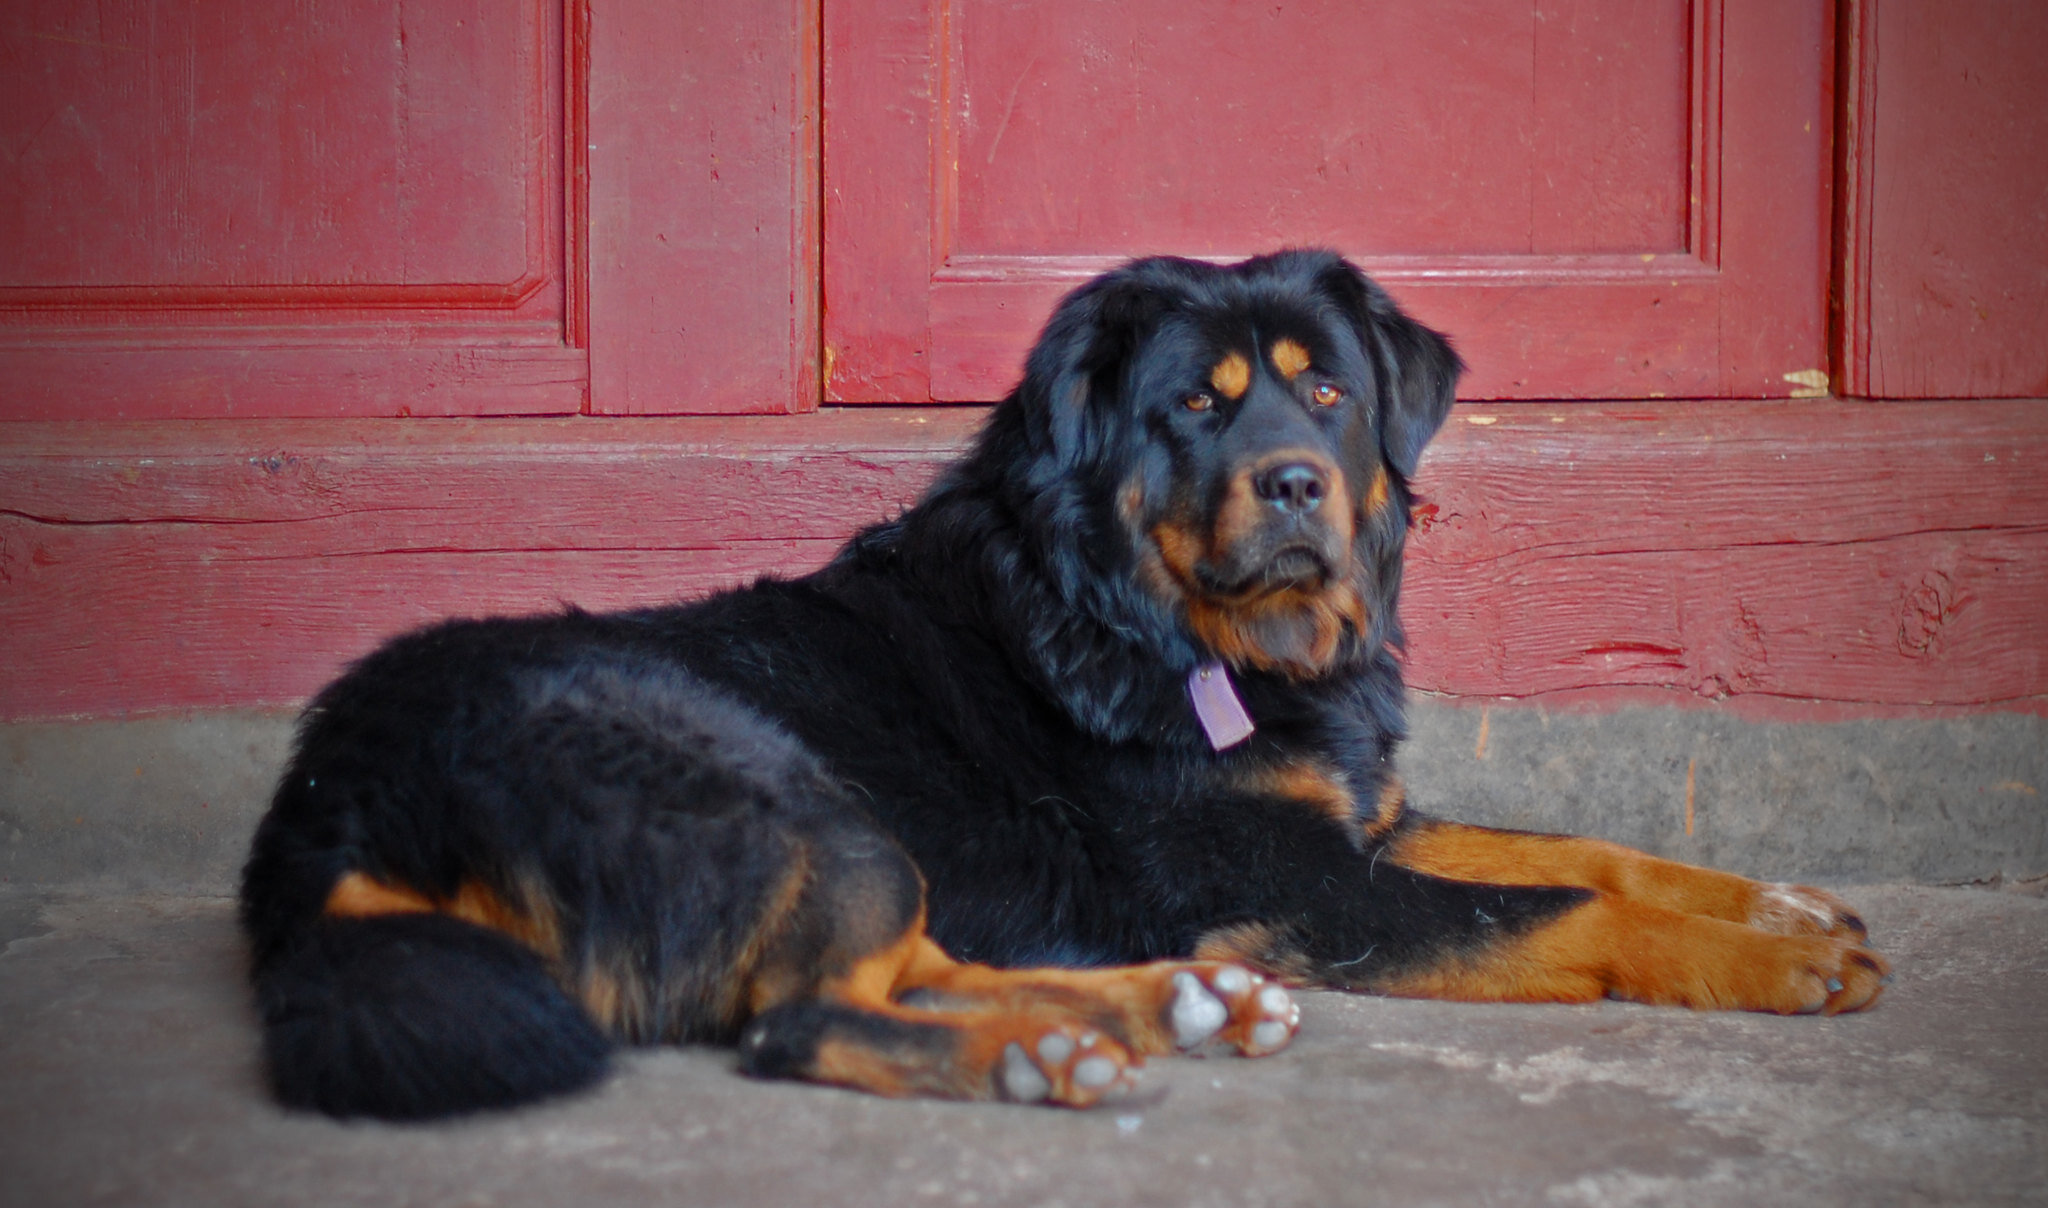 PICTURED: A Tibetan Mastiff outside a Chinese hostel. Photo credit Tim Quijano, CC 2.0